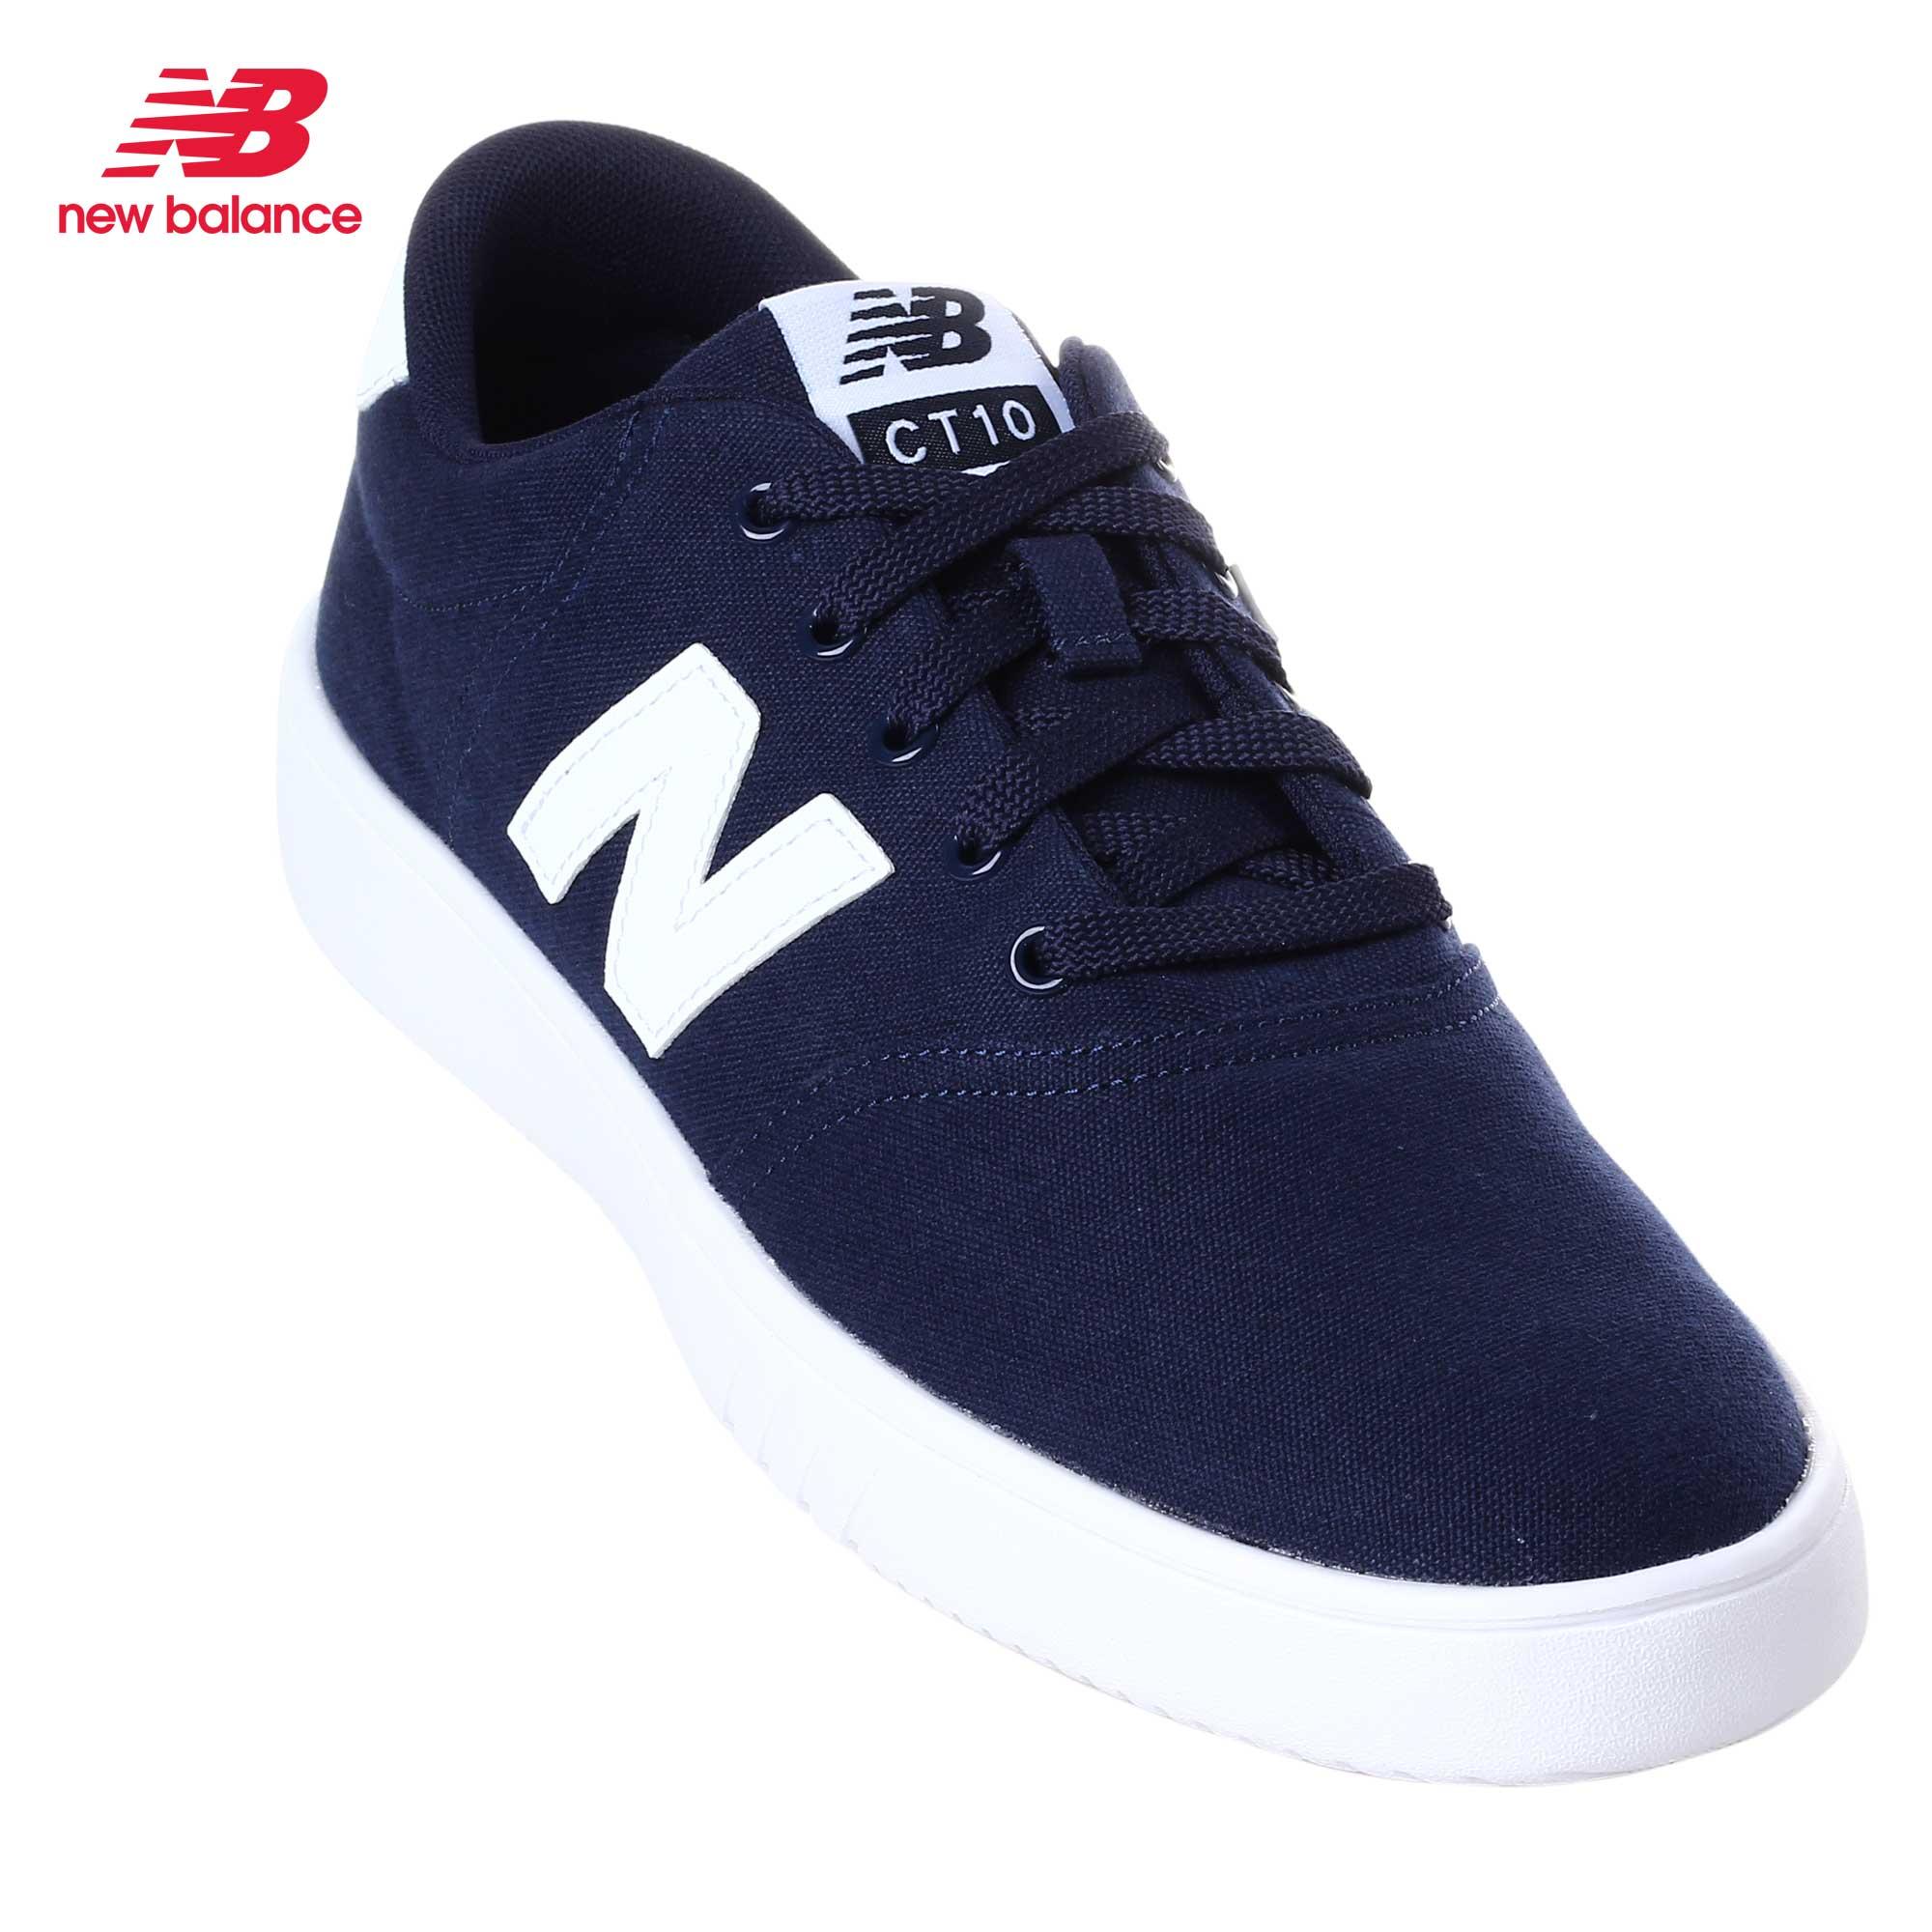 new balance shoes price in philippines